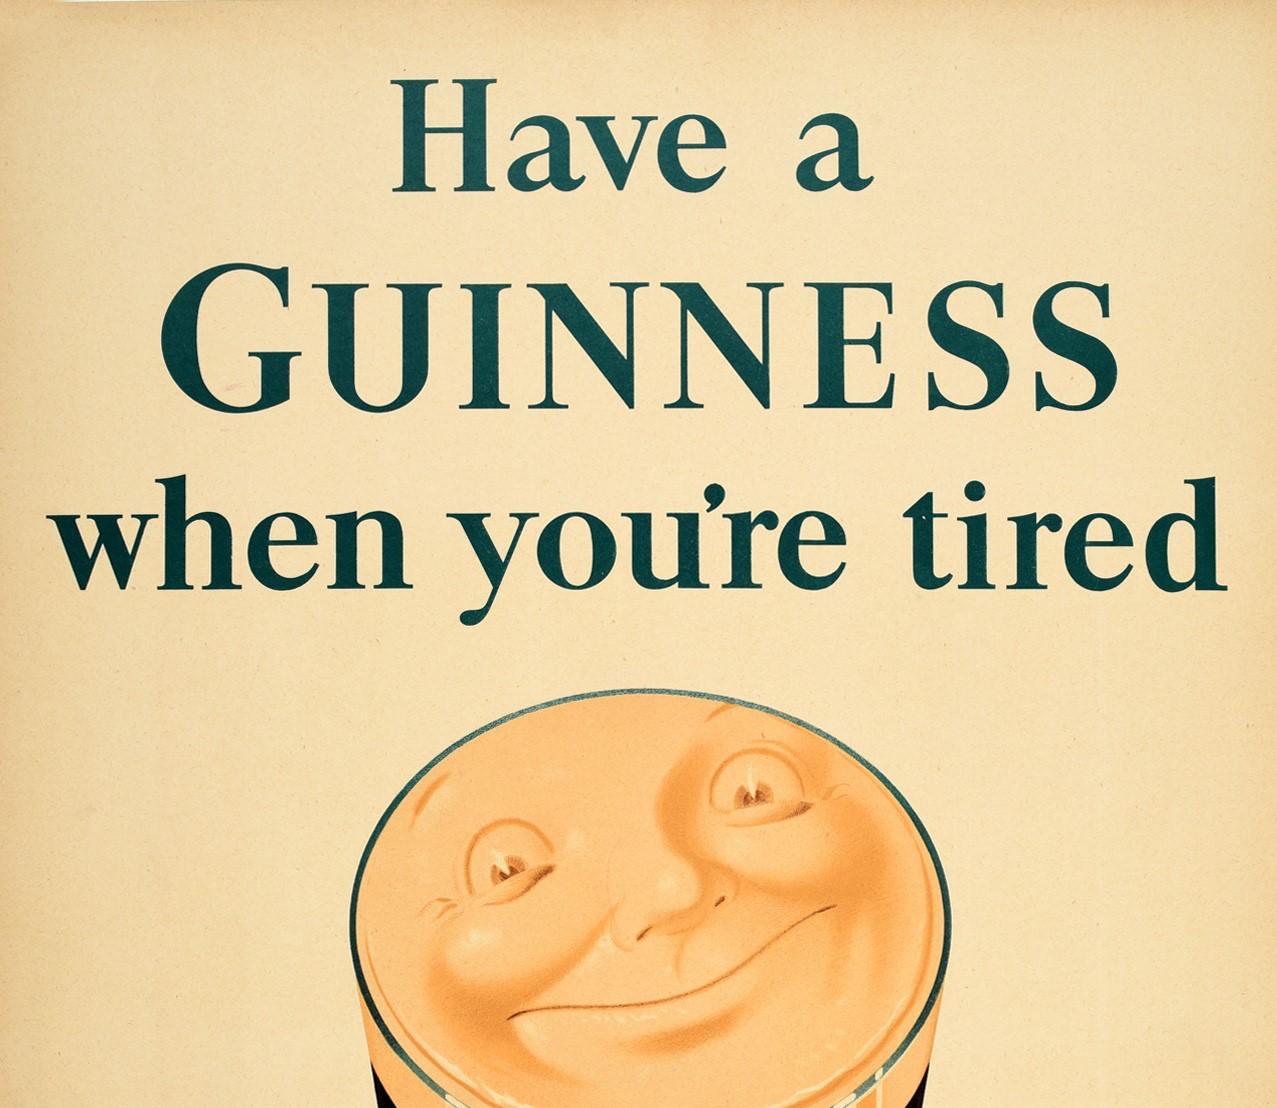 Original Vintage Guinness Poster Have A Guinness When You're Tired Relaxing Pint - Print by John Gilroy